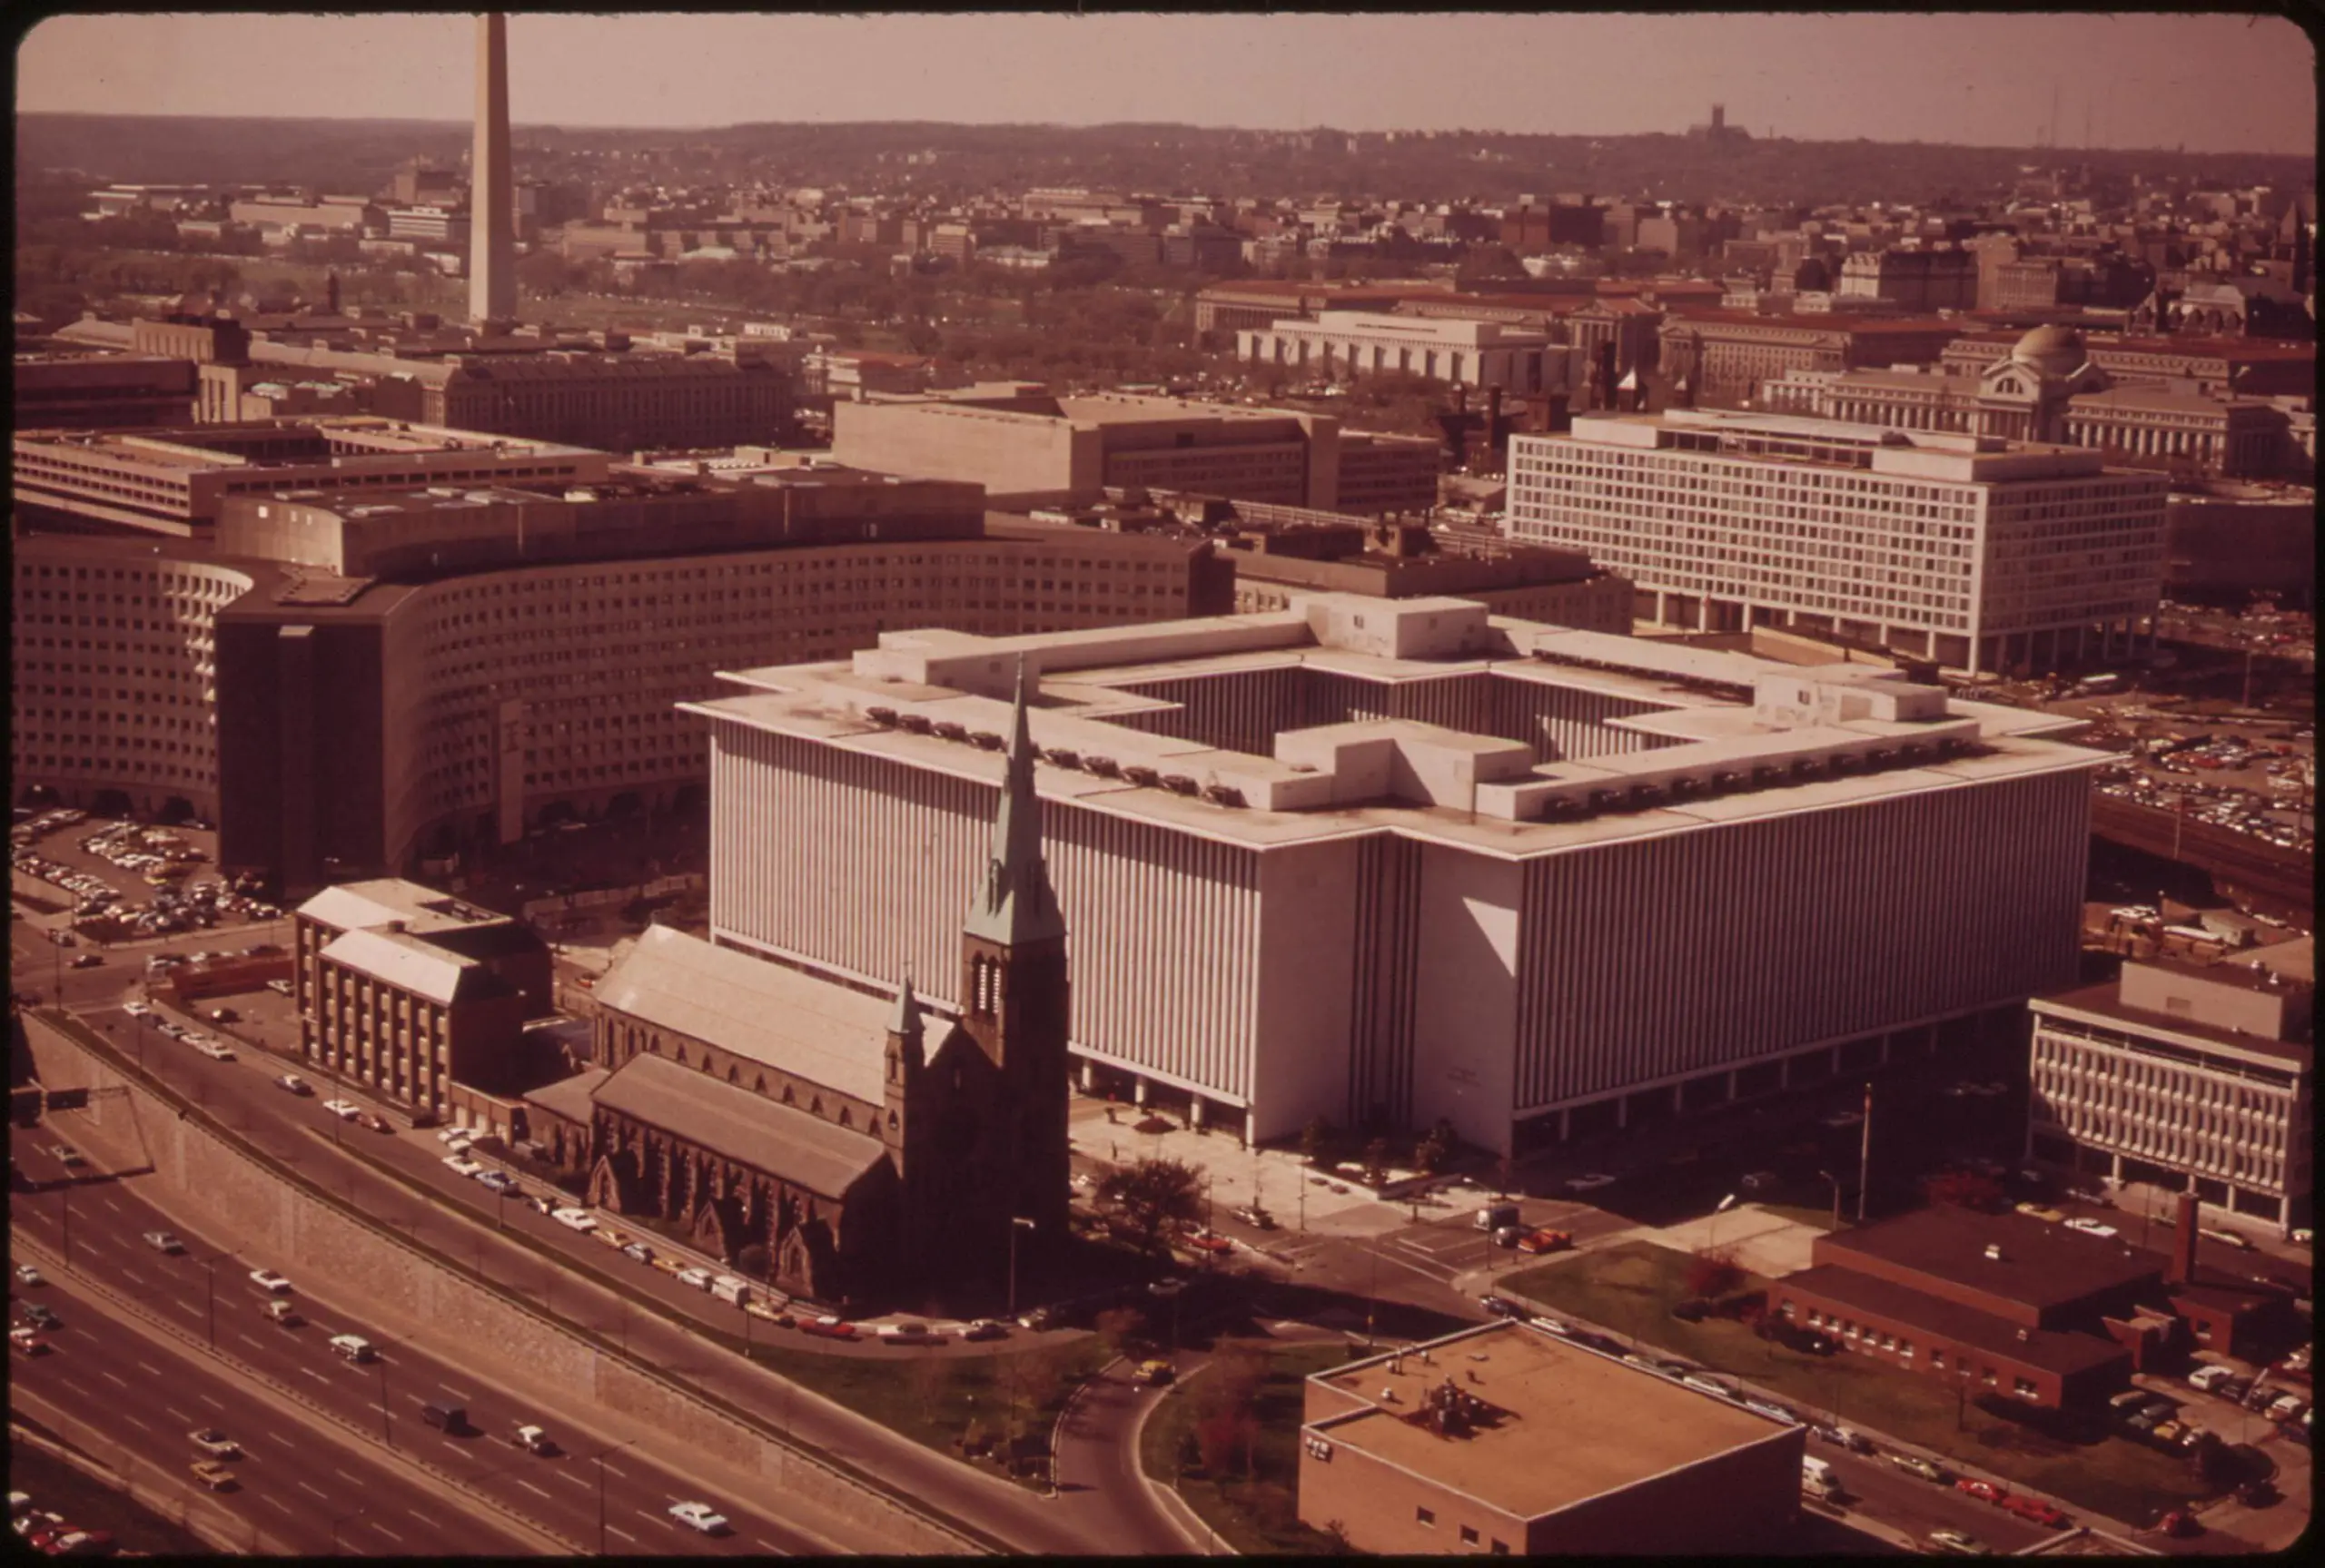 Southwest Washington, D.C. With South End Of L'Enfant Plaza In Foreground, April 1973